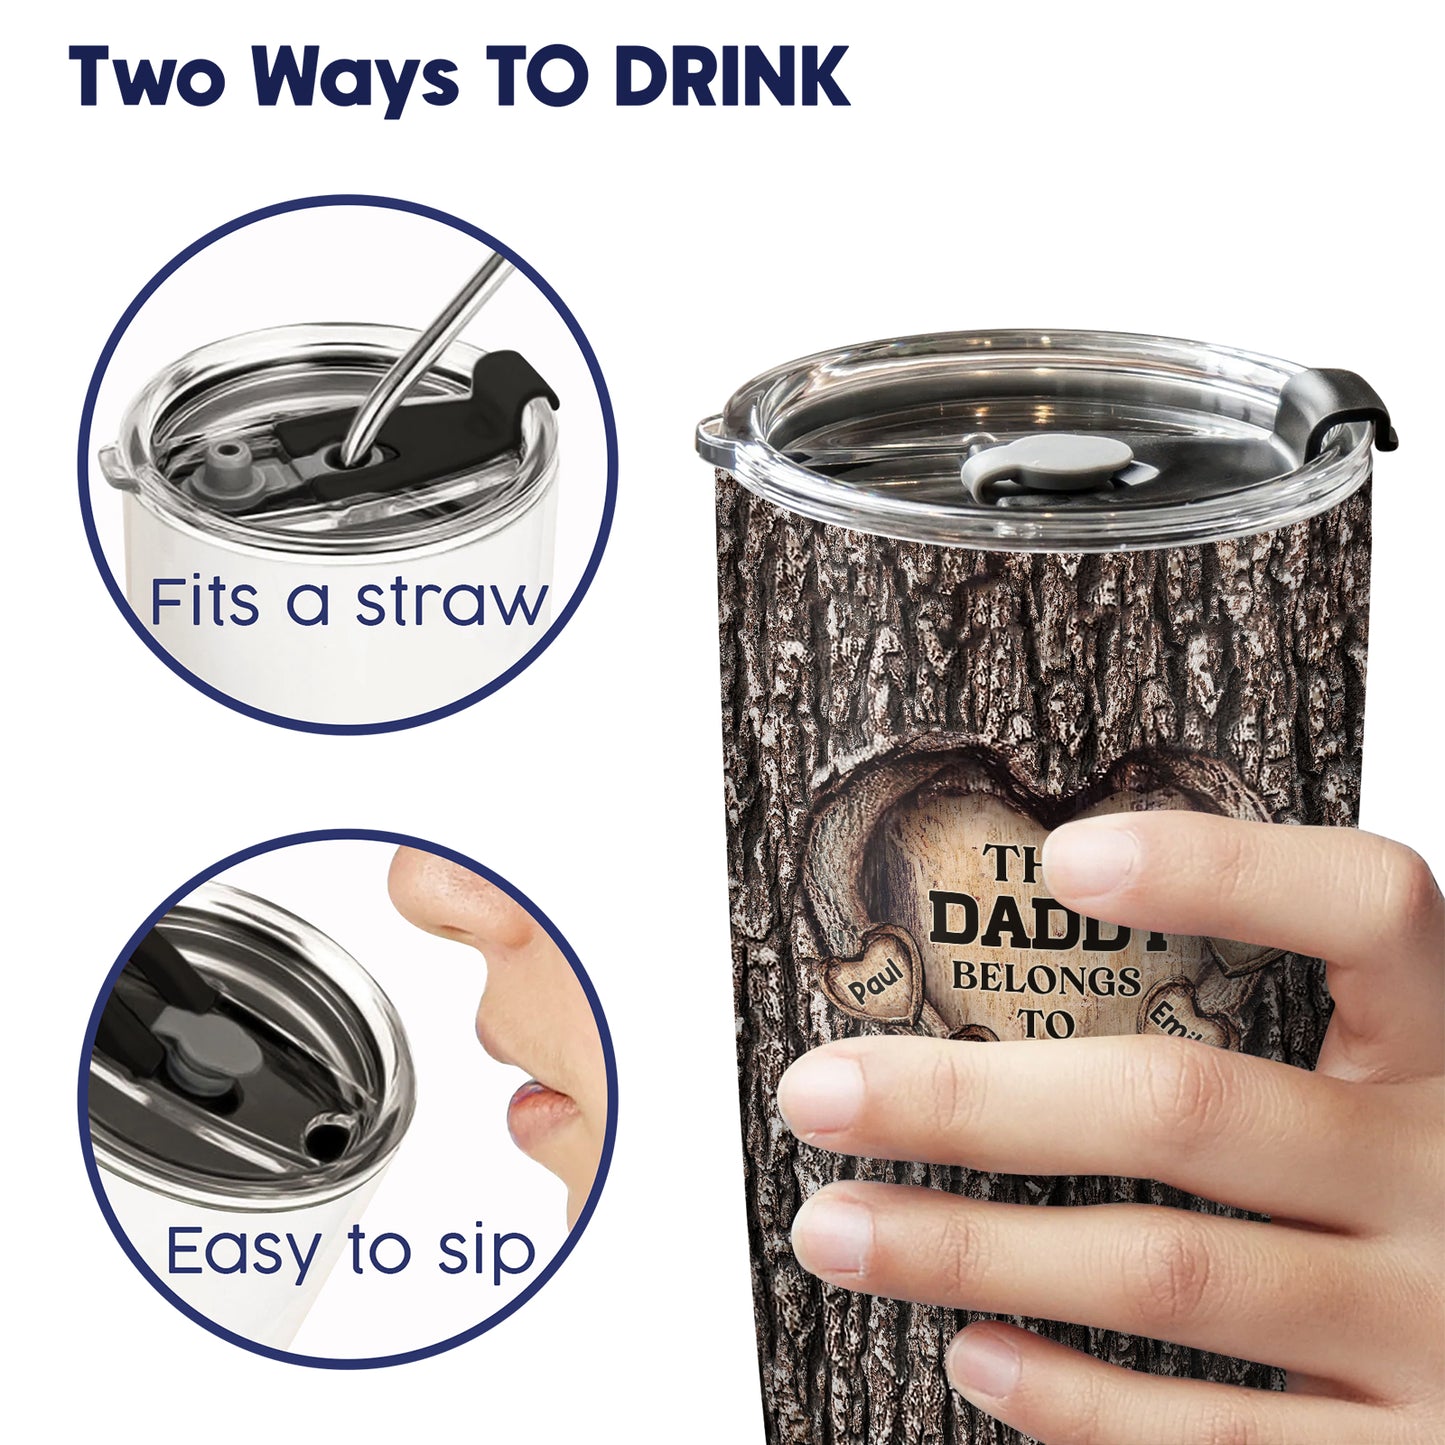 Father - Dad's Heart - Personalized Tumbler